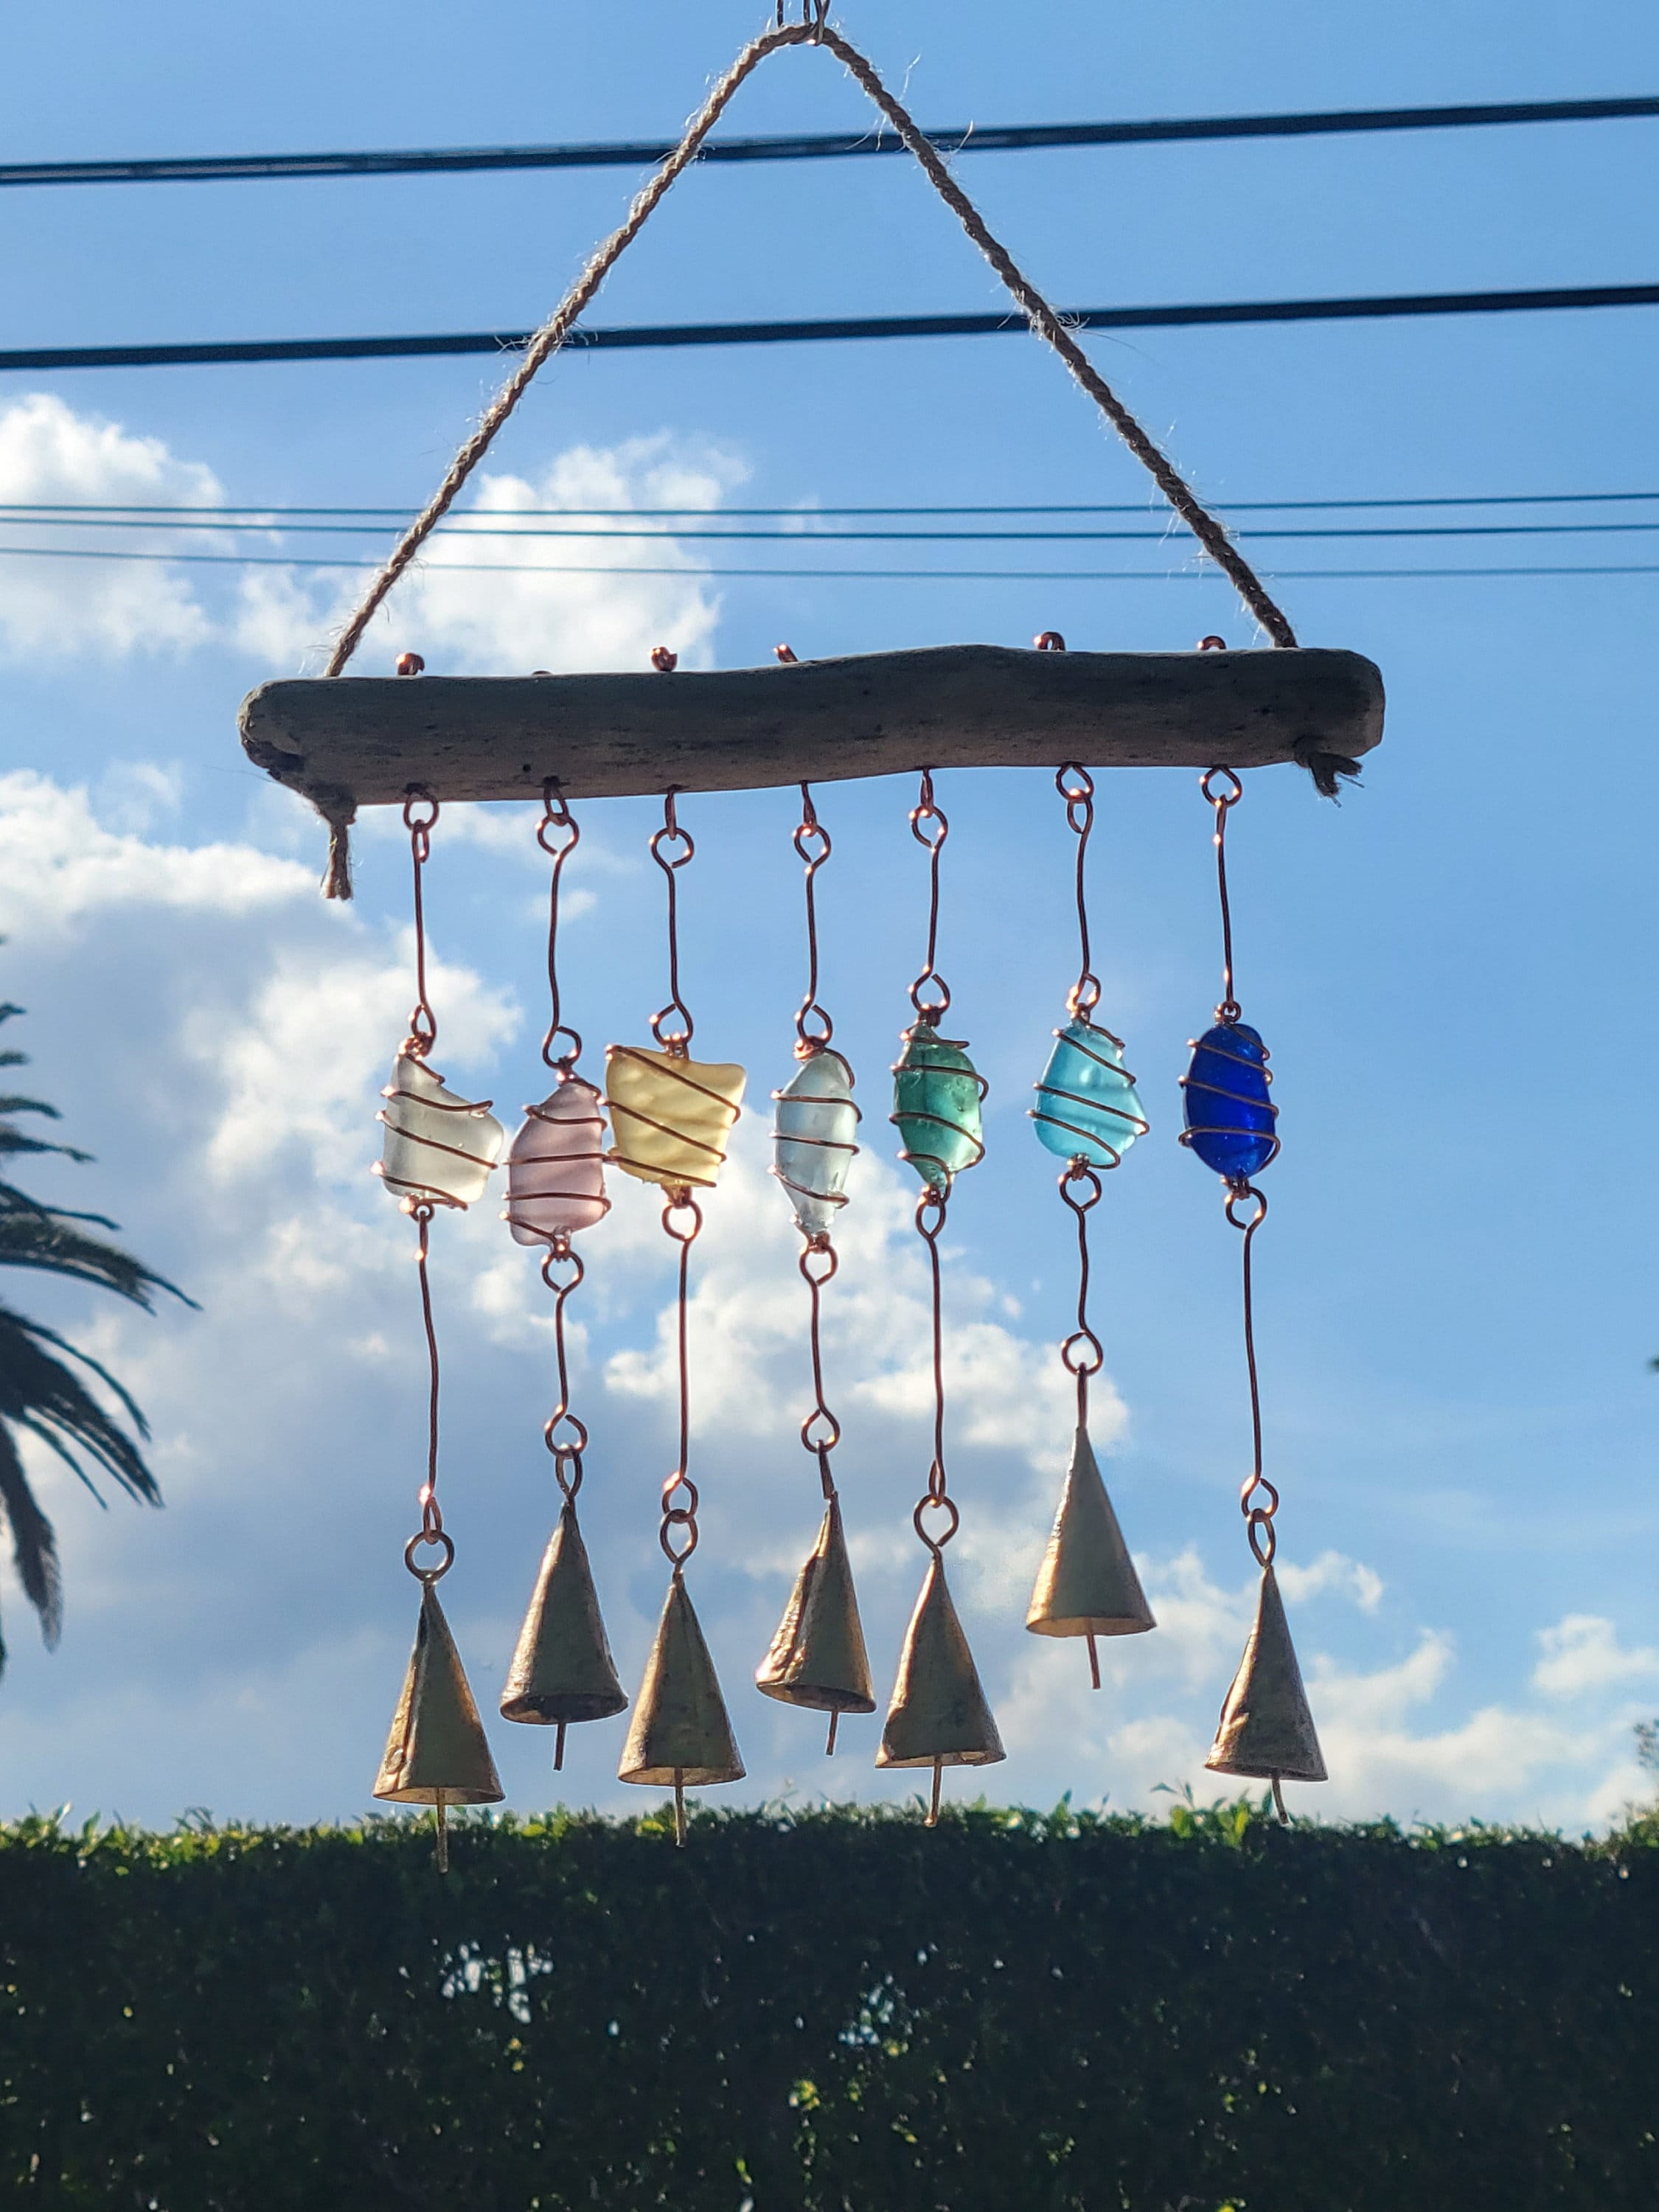 MARE Sea Glass Wind Chime, Mobile, Chime, Driftwood, Suncatcher, Beads 